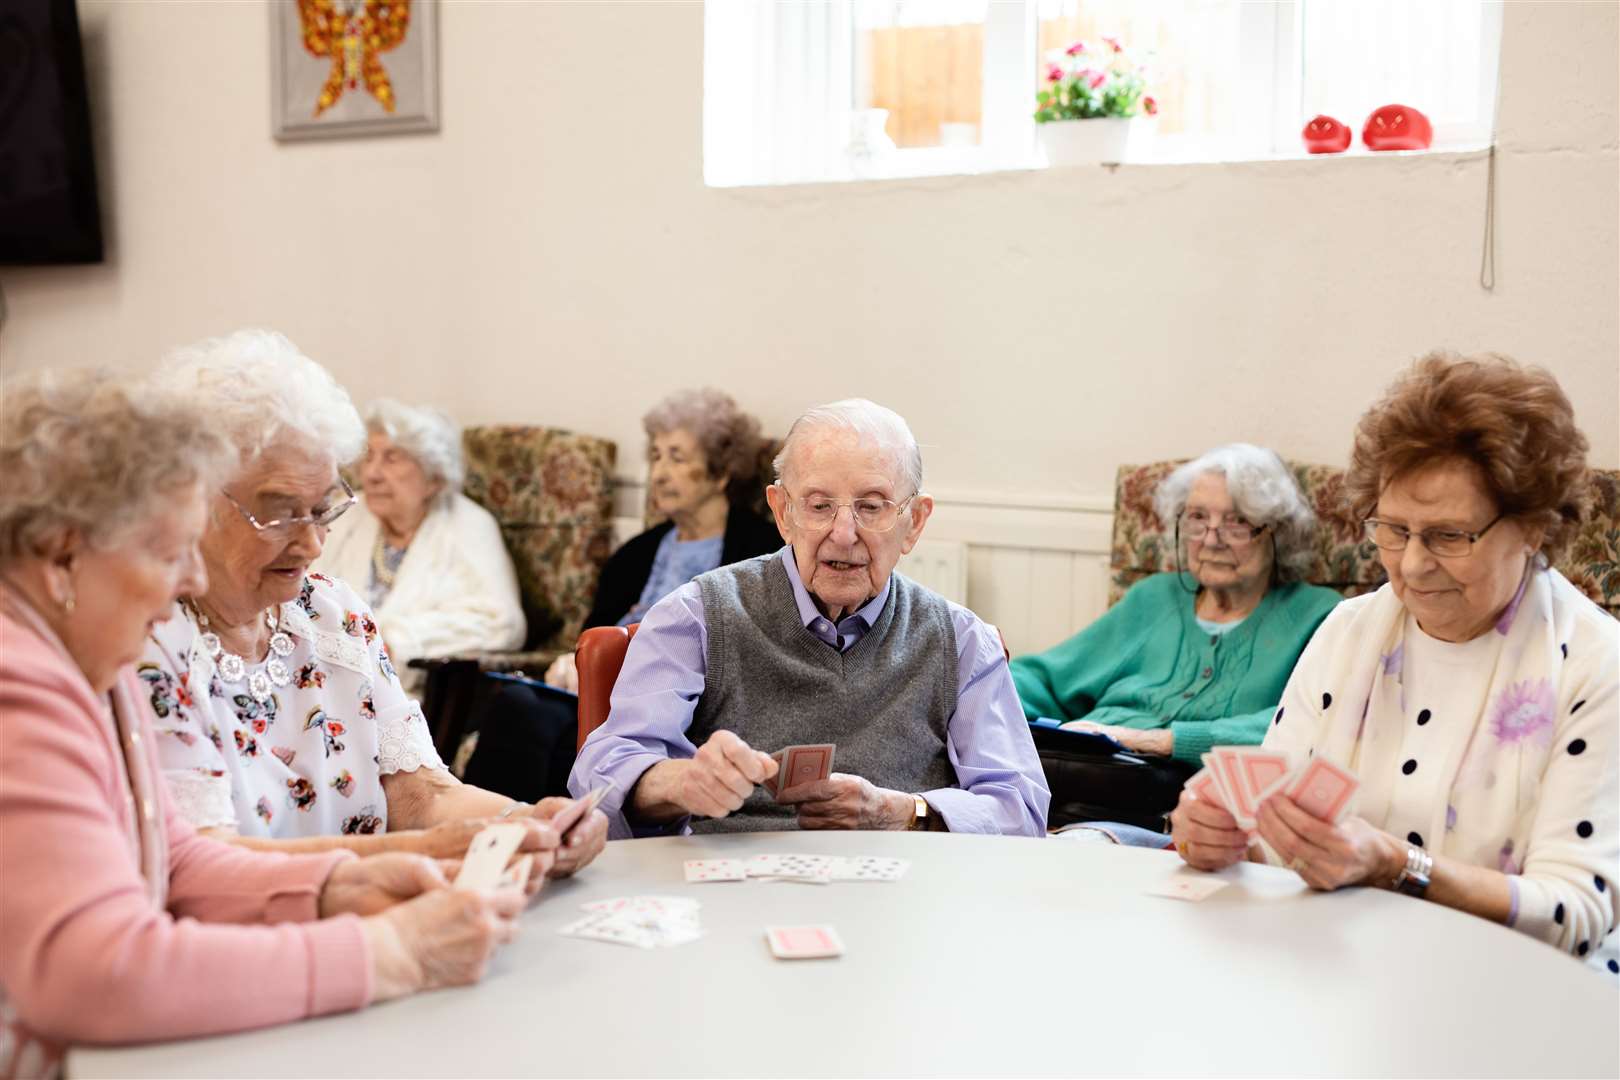 Services run by Age UK North West Kent will now be taken over by the Medway branch. Picture: Age UK Medway